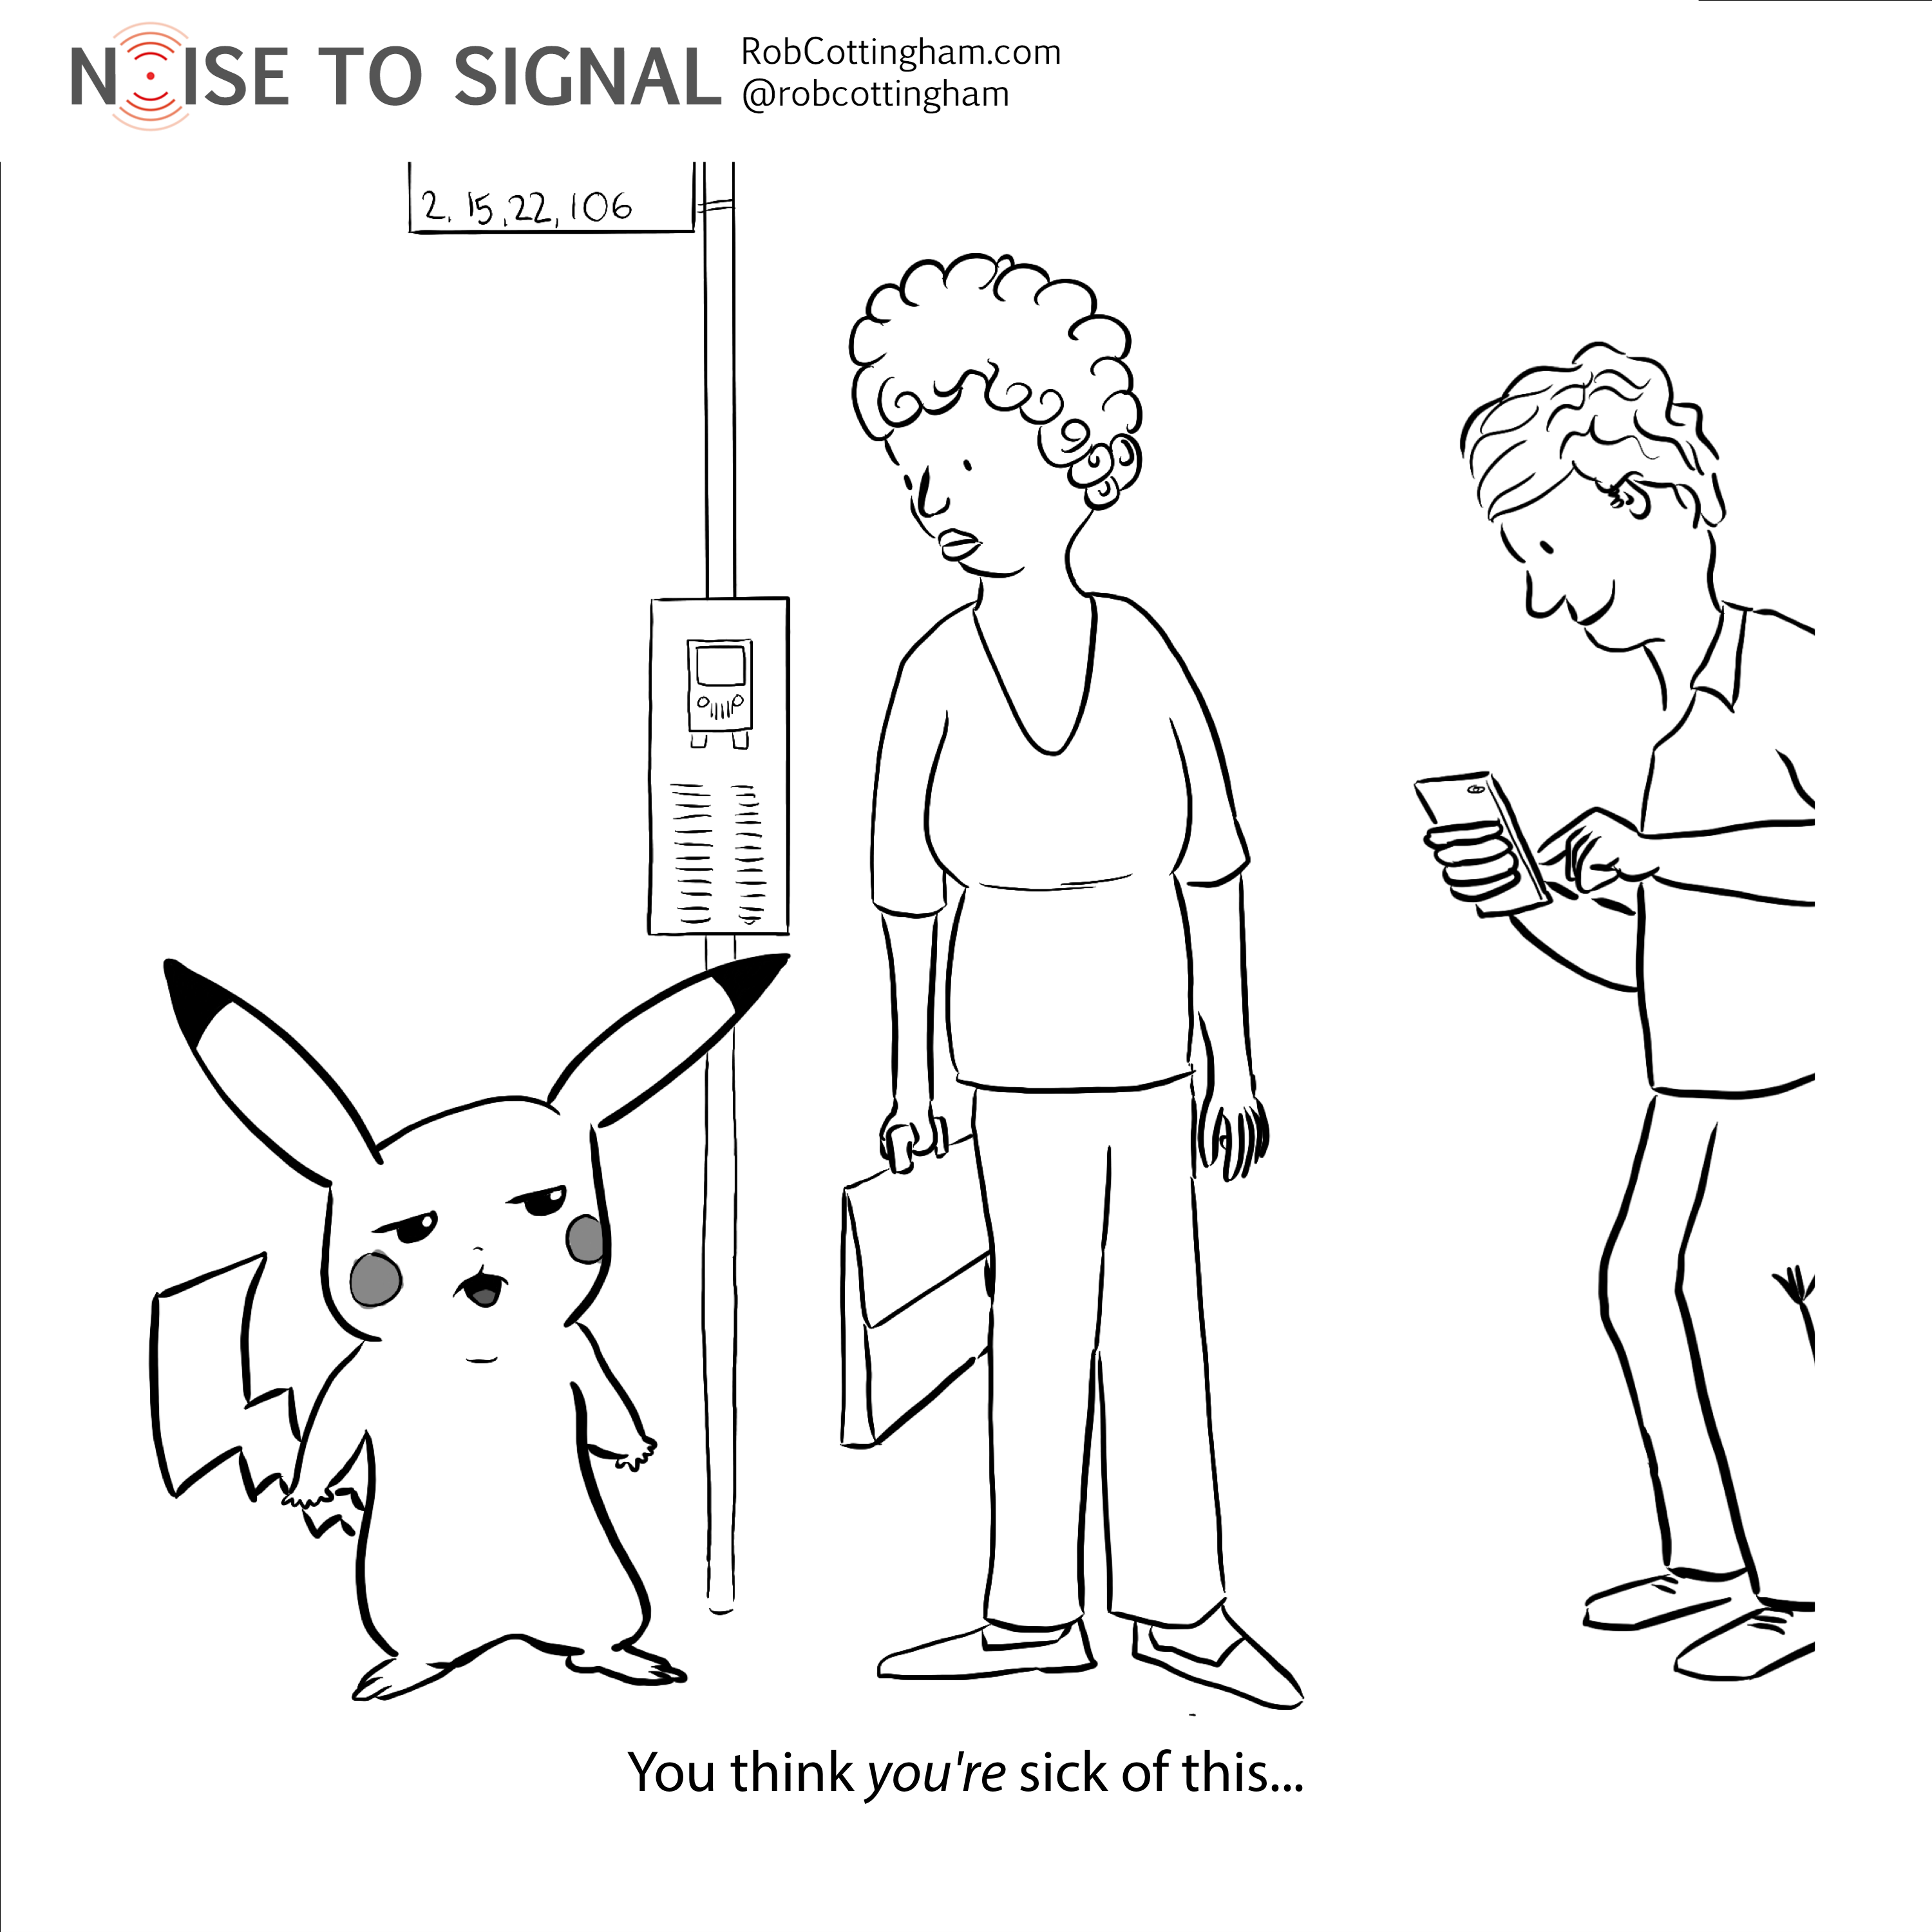 (Bemused Pikachu at a bus stop to an onlooker) You think YOU'RE sick of this...